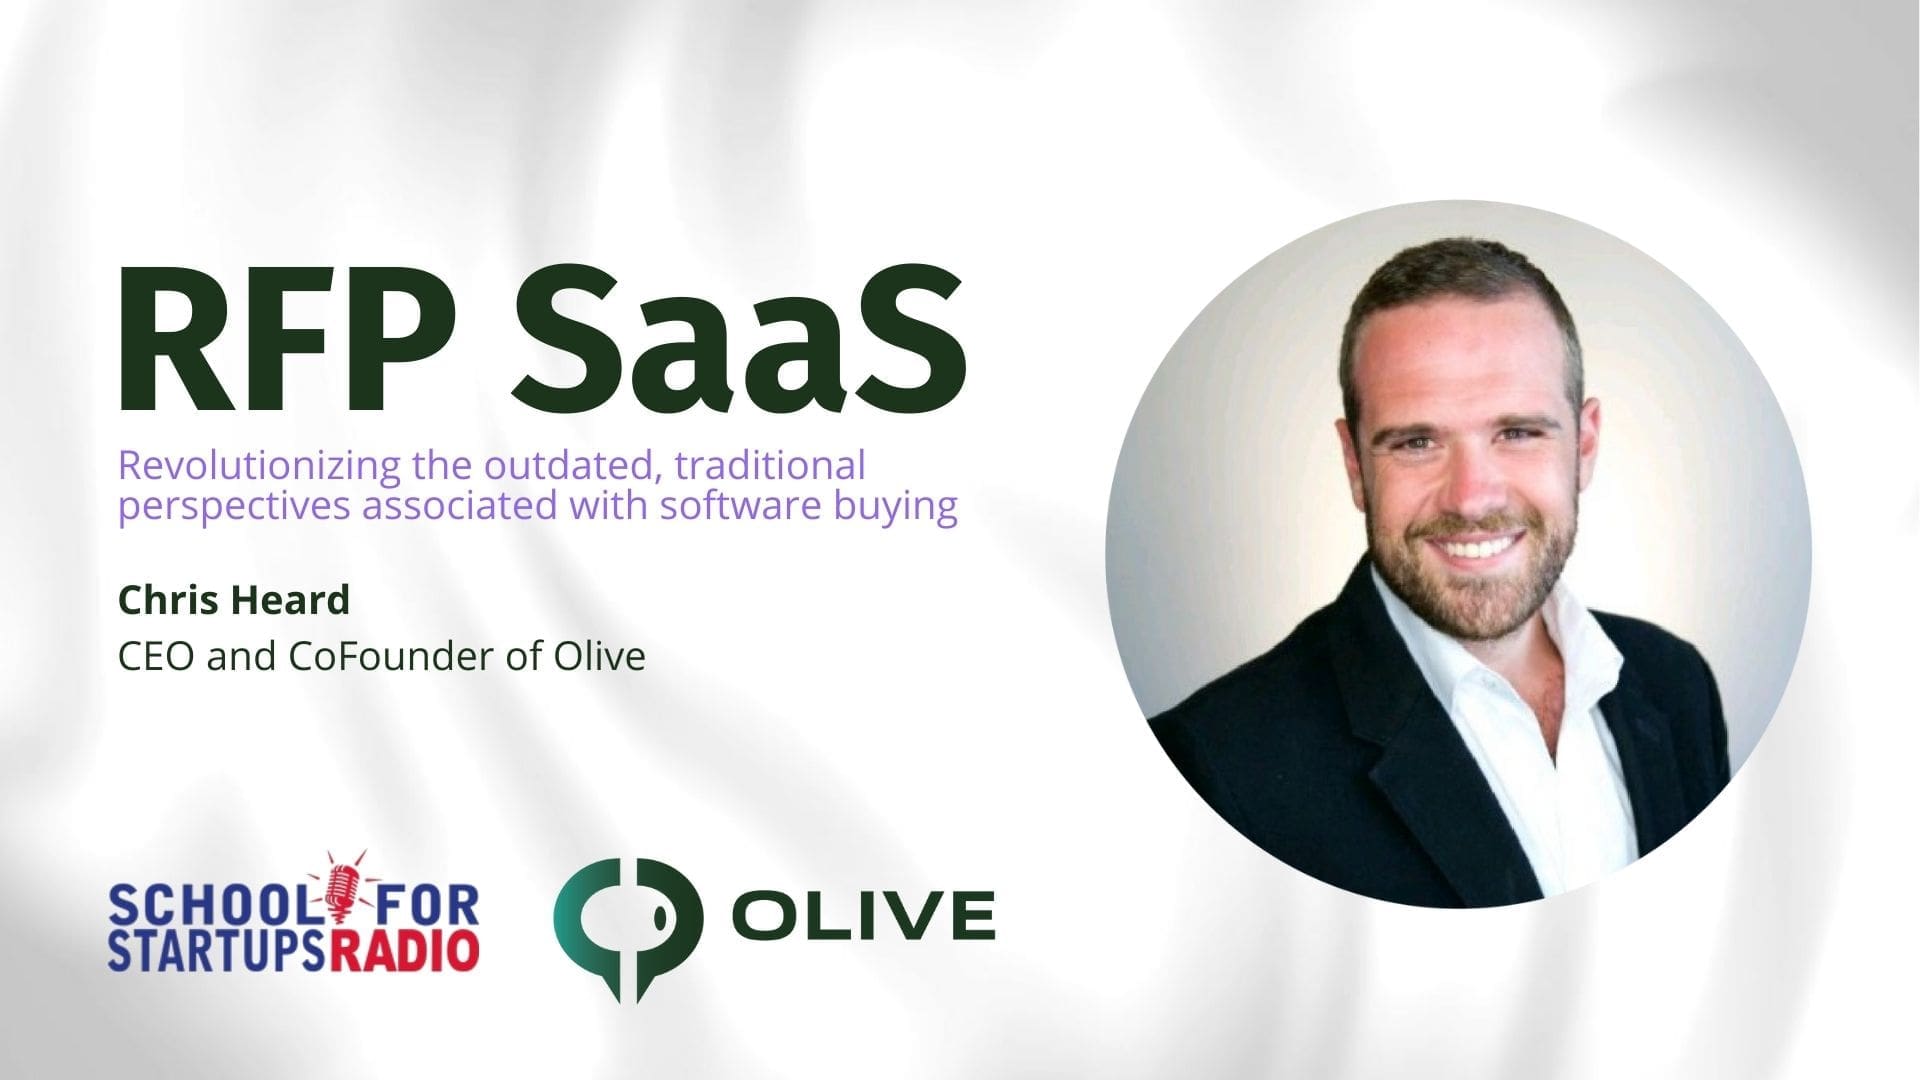 Revolutionizing the outdated, traditional perspectives associated with software buying